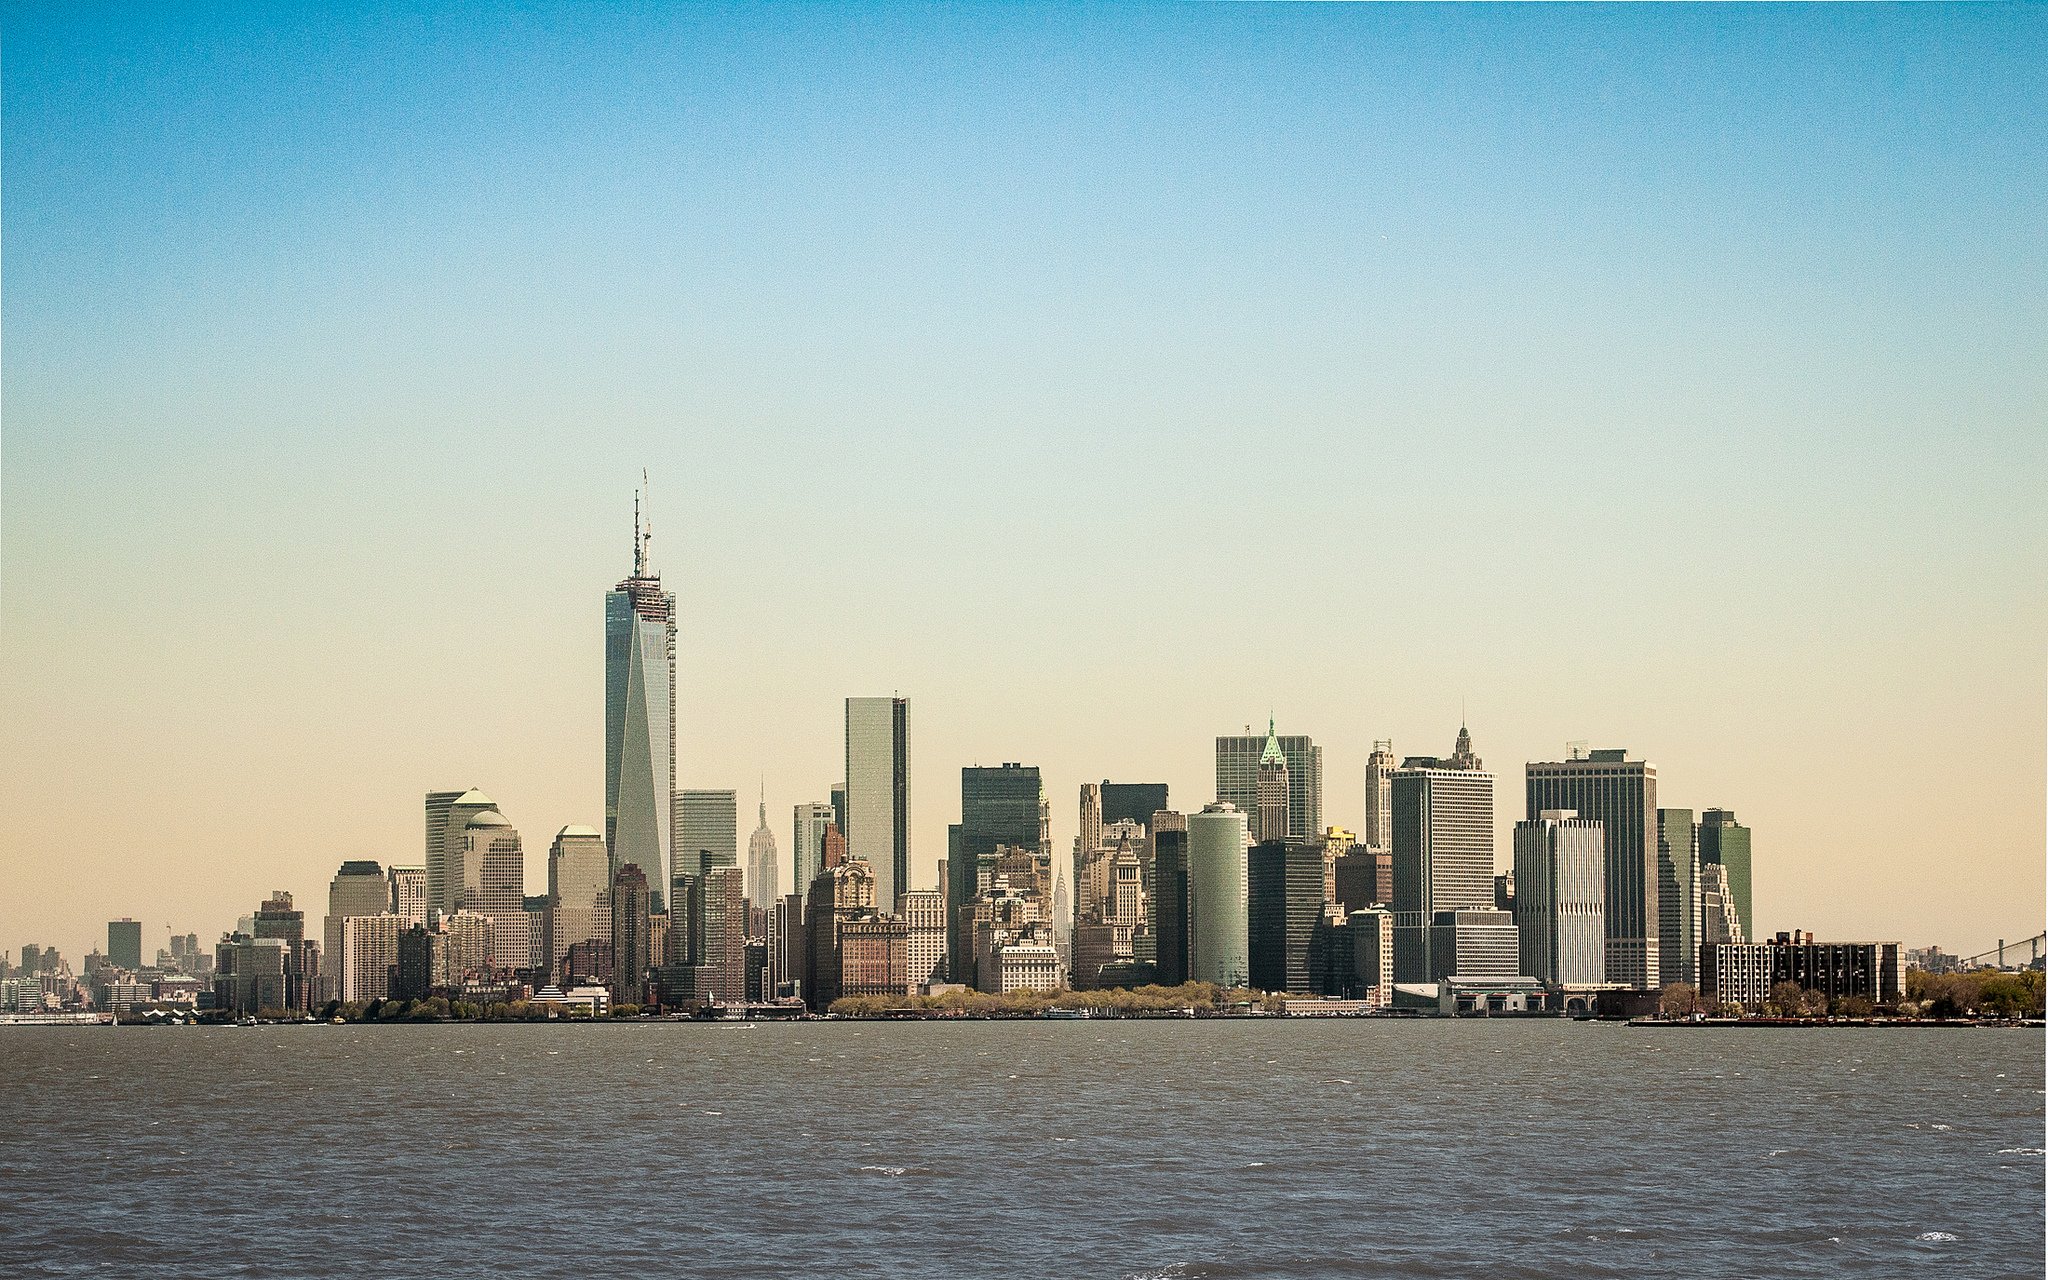 architecture, Bay, Black, Buildings, Cities, Clouds, Nyc, Rivers, Sky, Water, World, New, York, Big, Apple Wallpaper